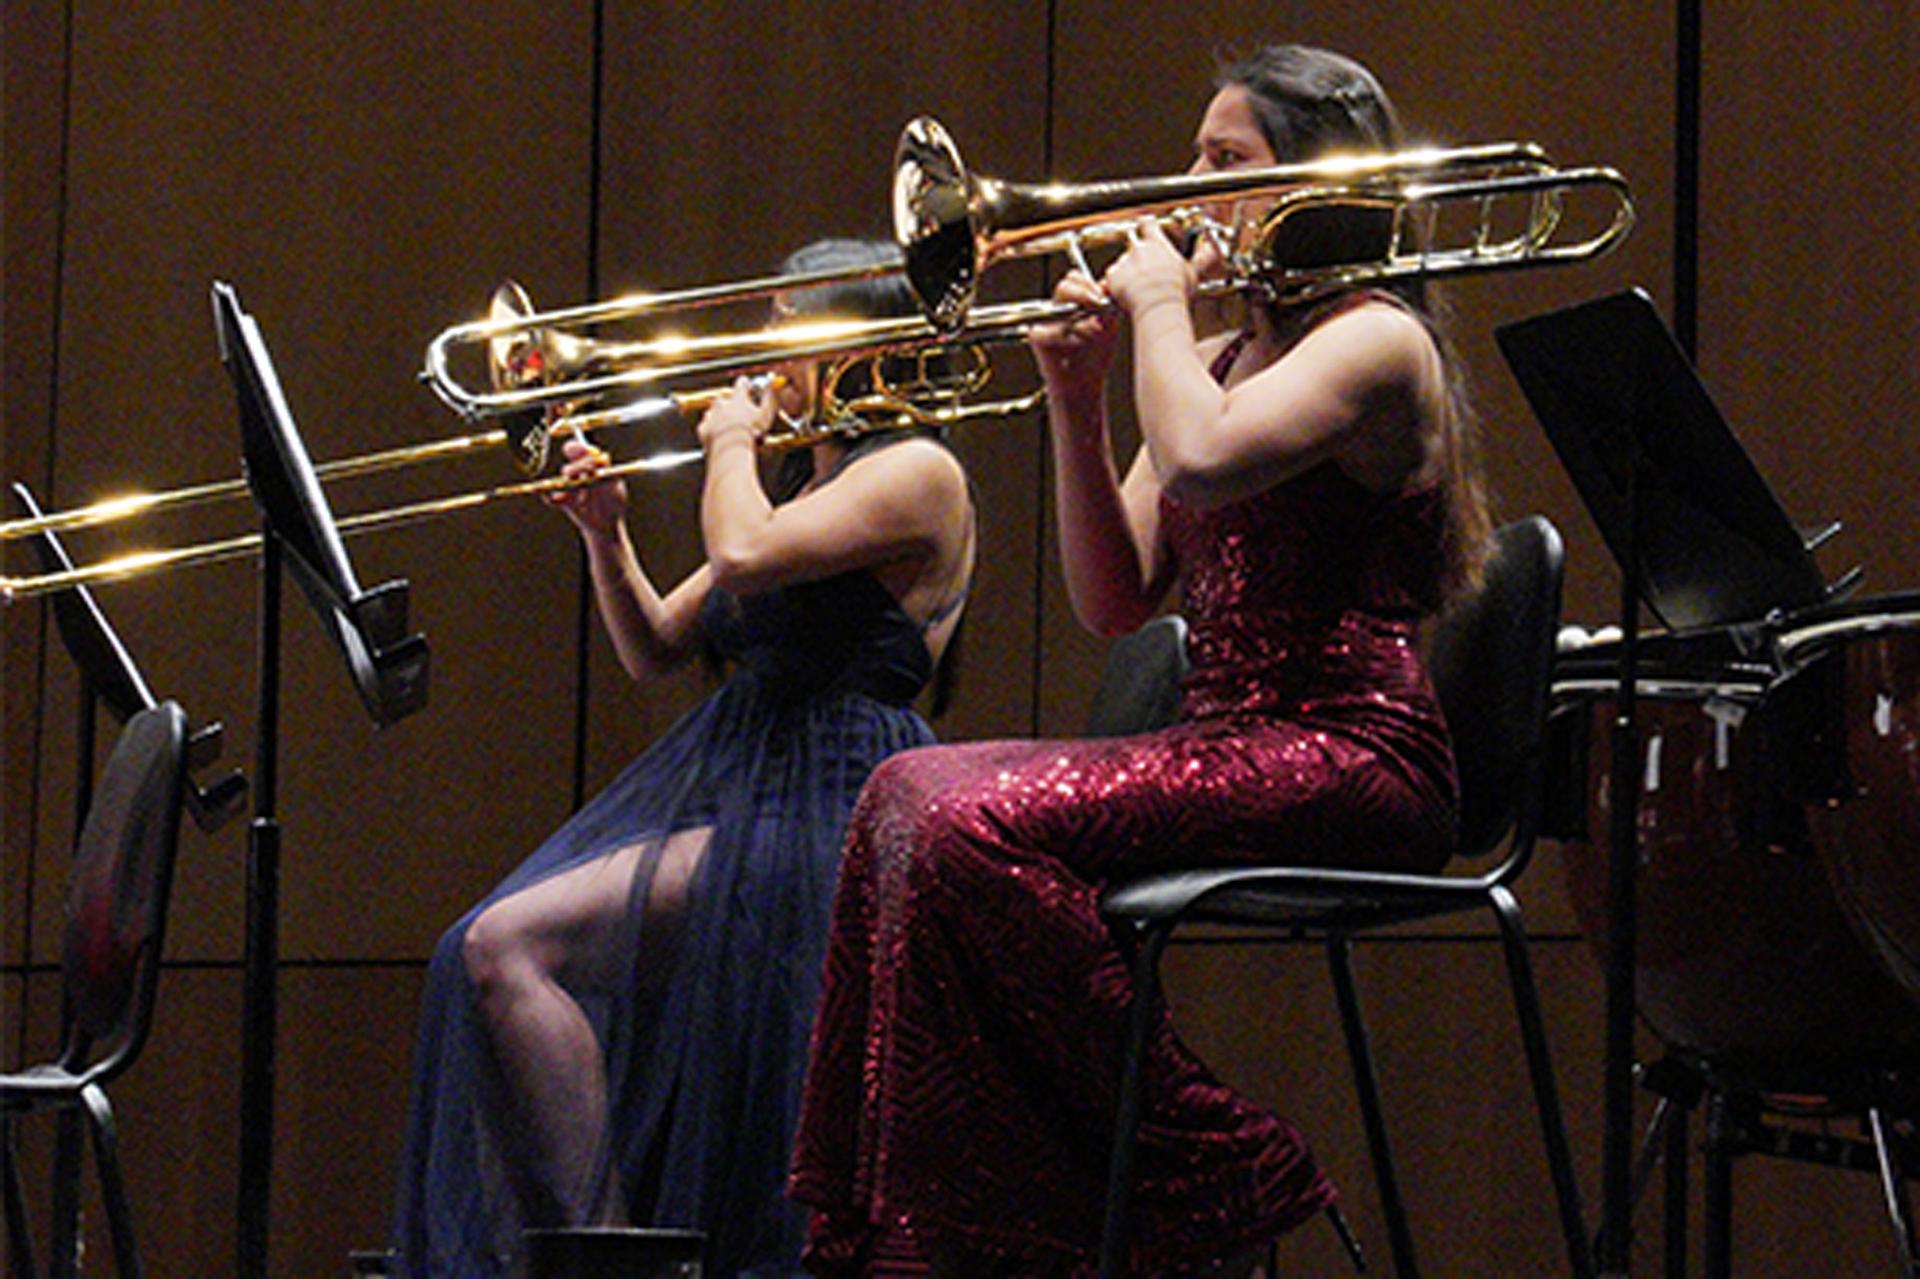 The women’s orchestra tries to play pieces by female composers at all of its shows.